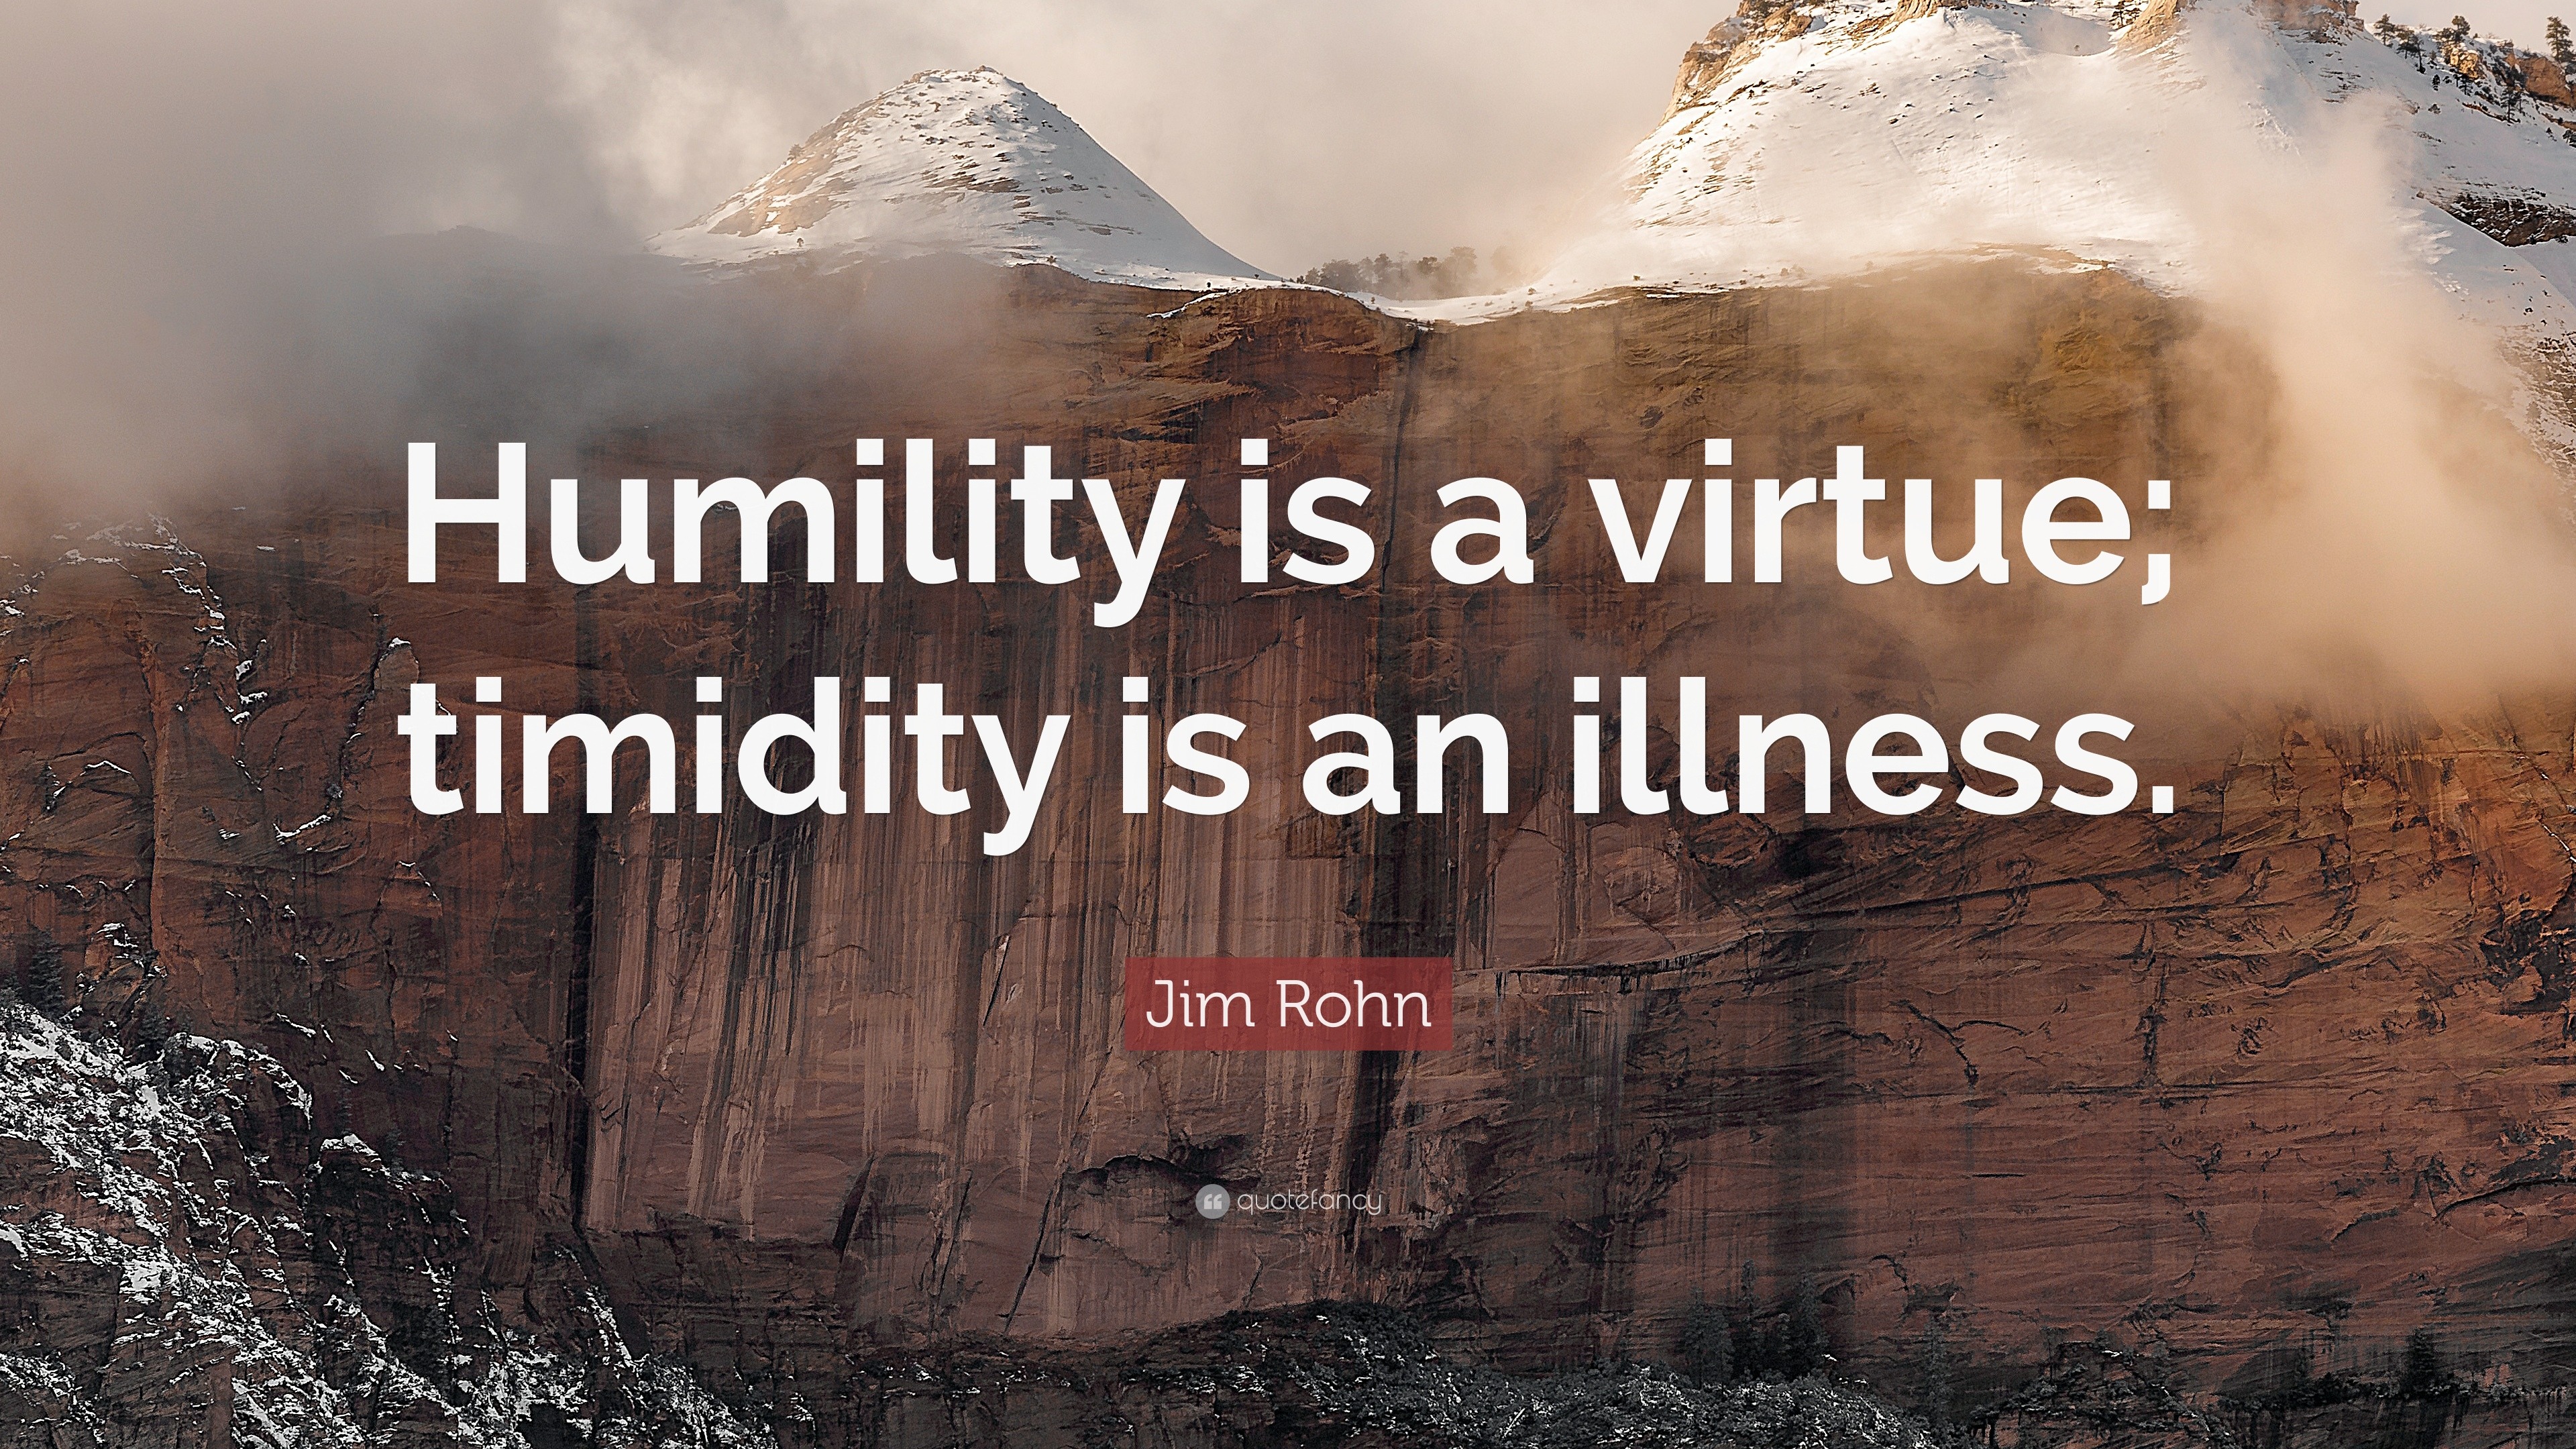 Jim Rohn Quote: “Humility is a virtue; timidity is an illness.”